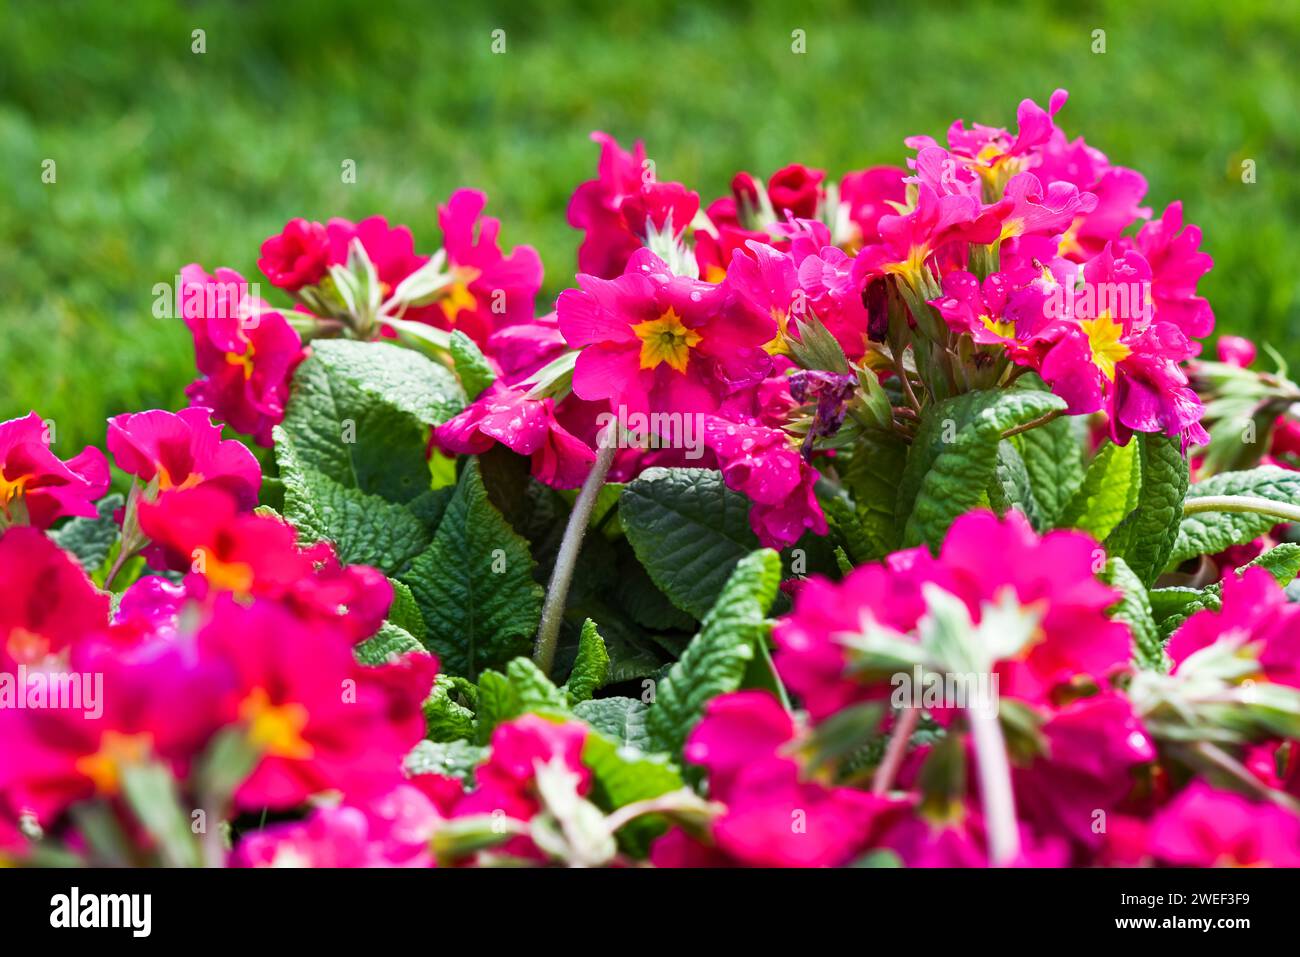 Primula pink in the garden on a beautiful sunny day, selective focus on the flower. Stock Photo